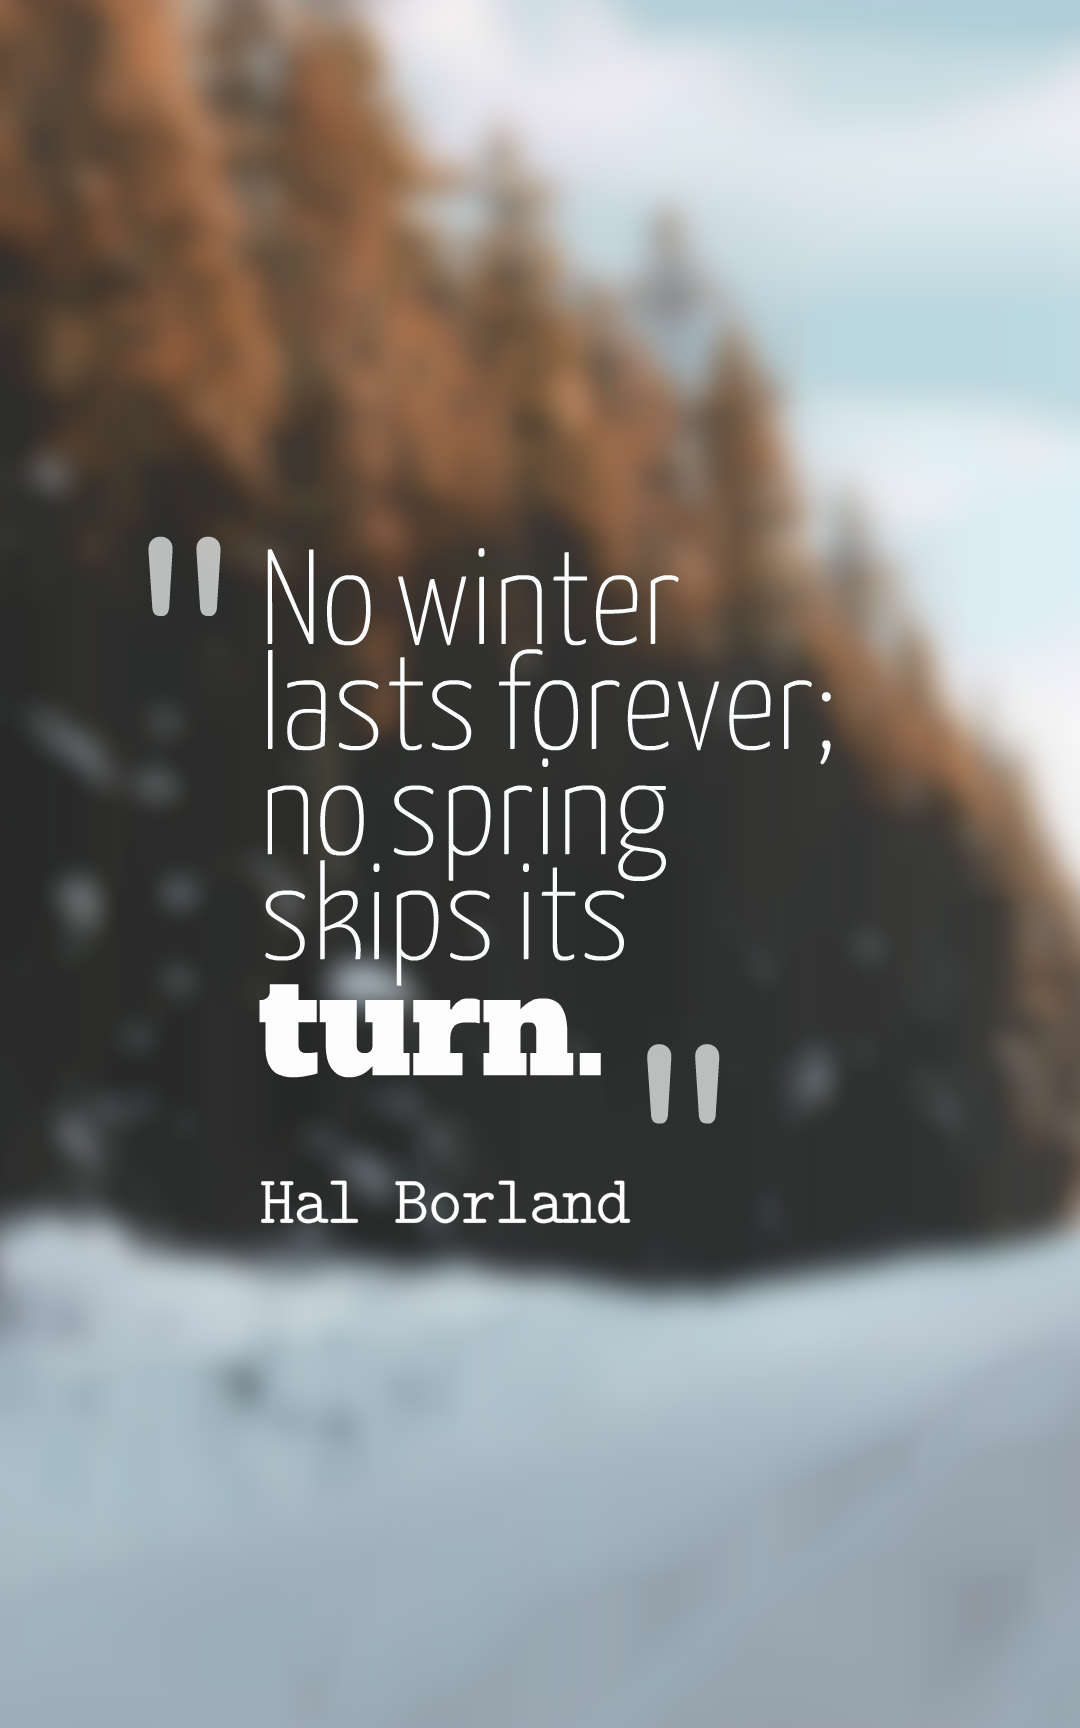 No winter lasts forever no spring skips its turn.